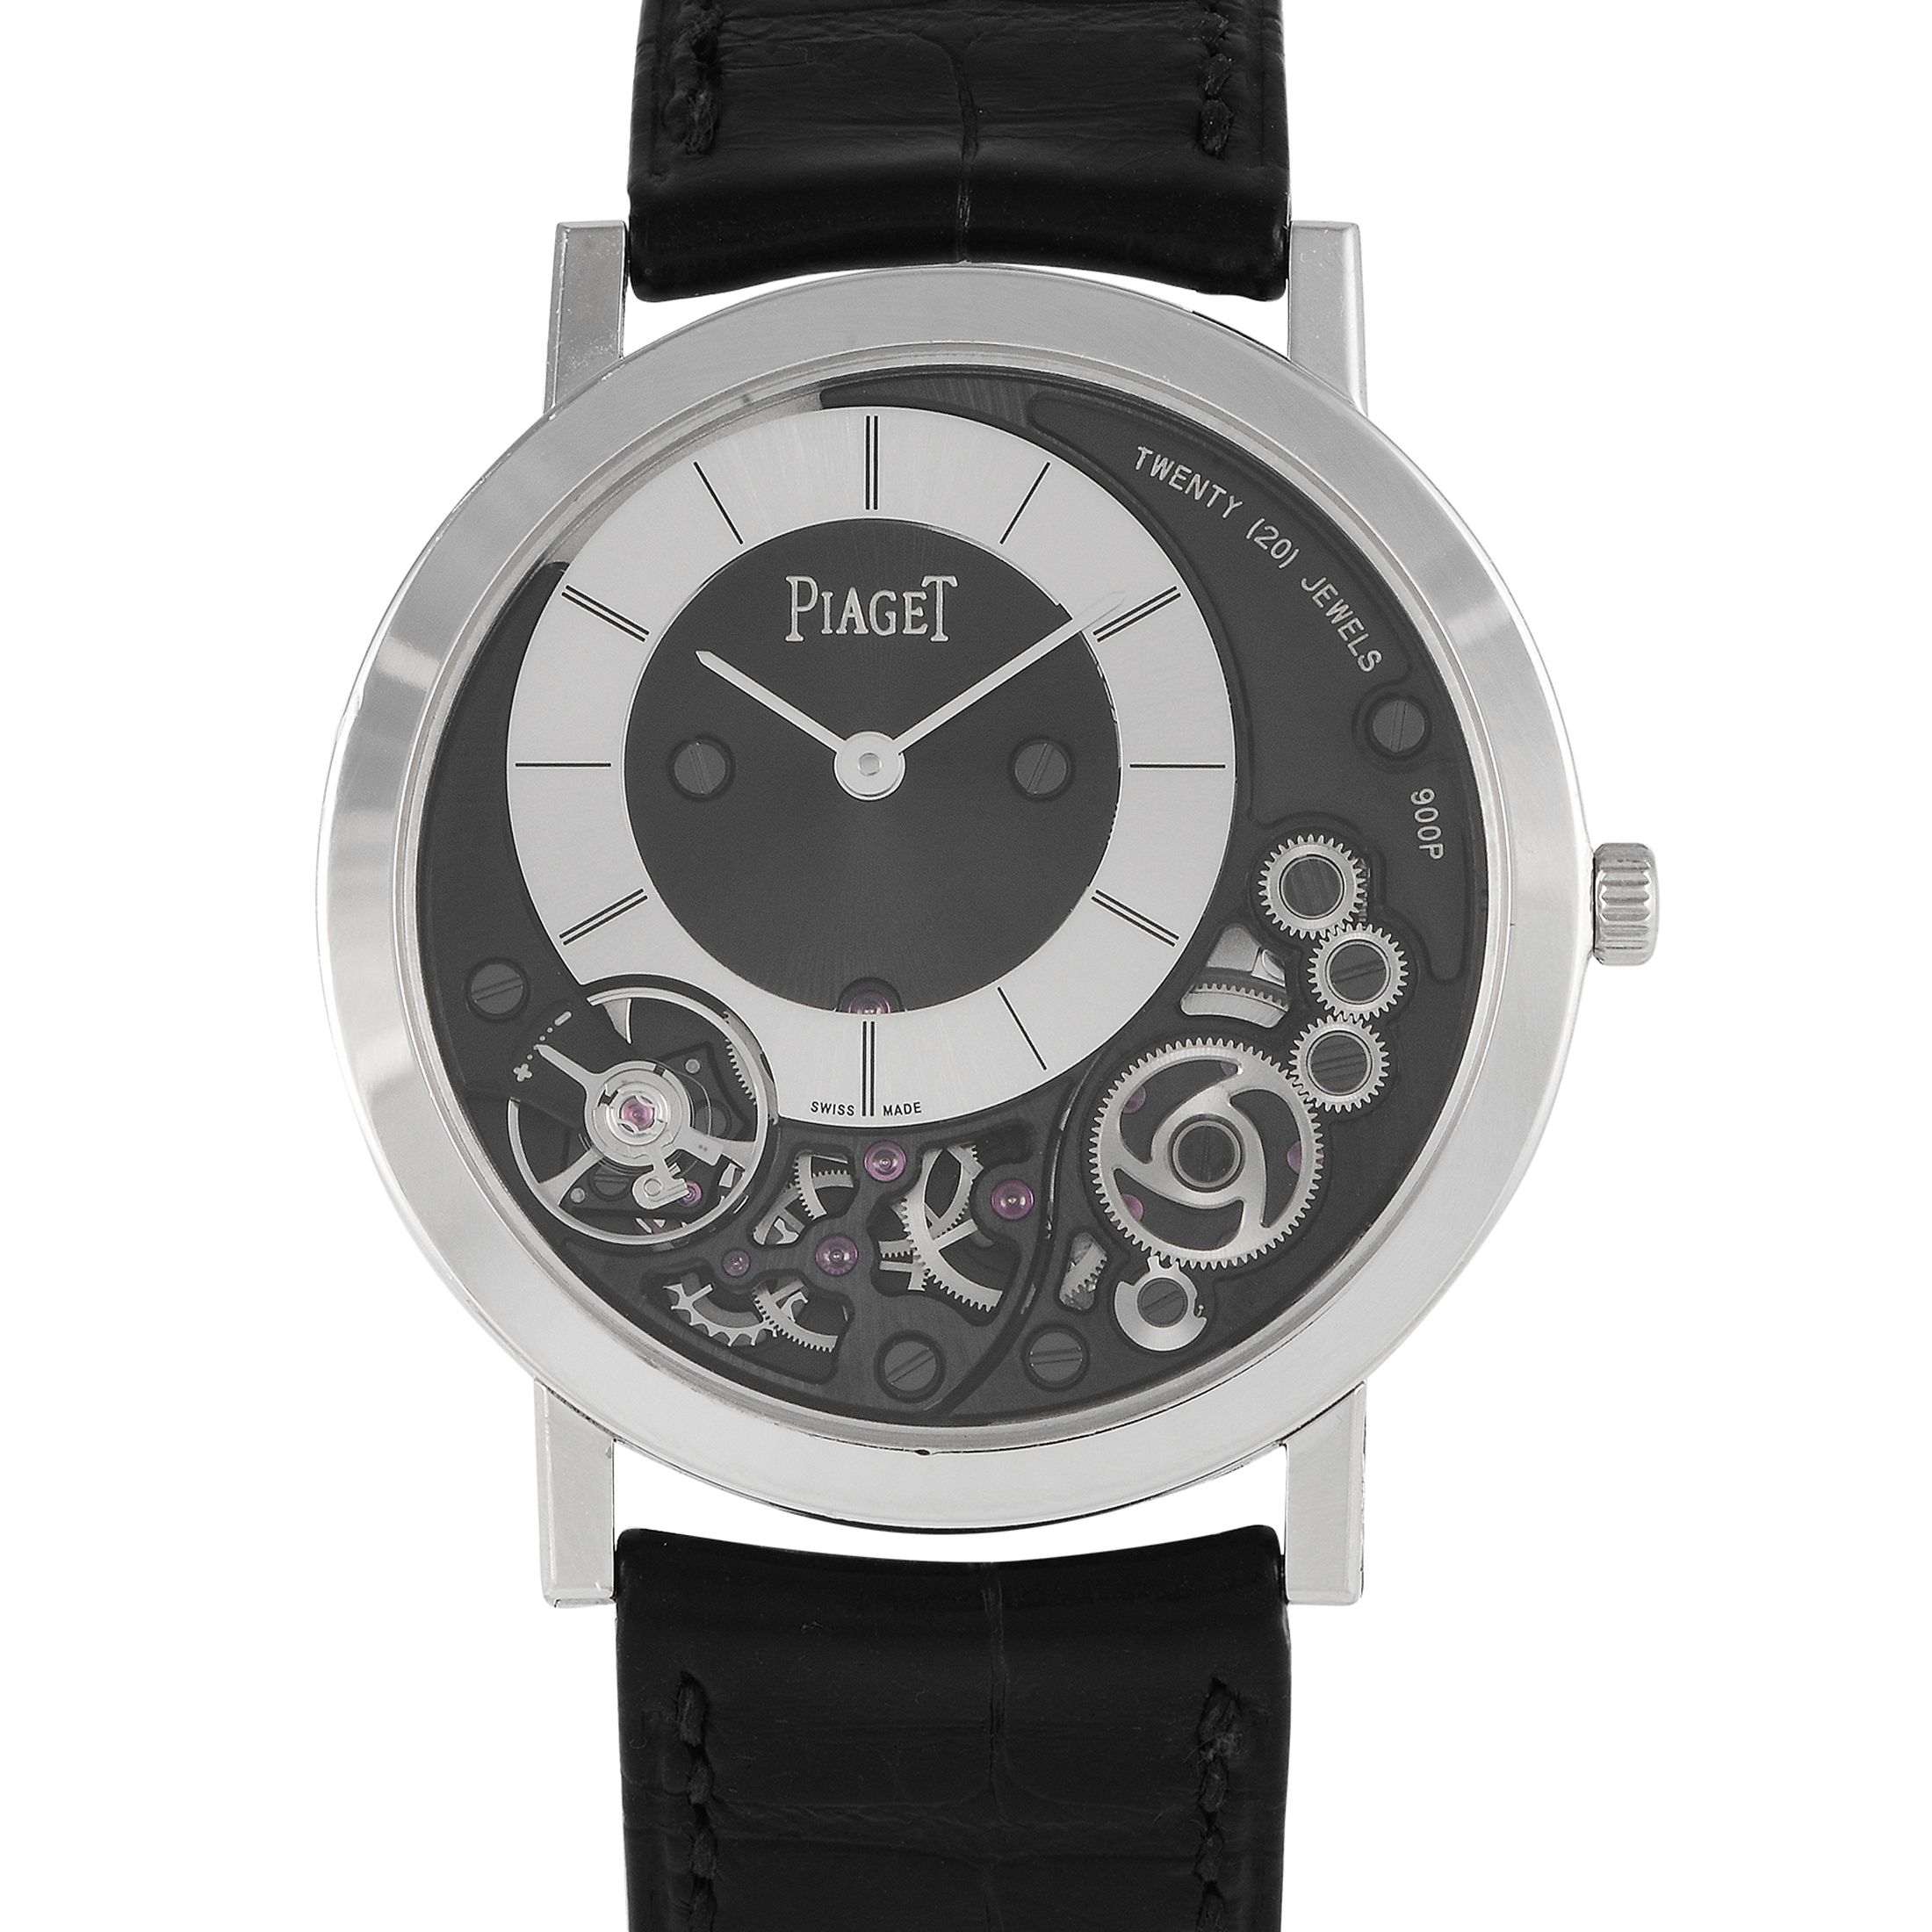 Piaget Altiplano Ultra-Thin White Gold Watch G0A39111